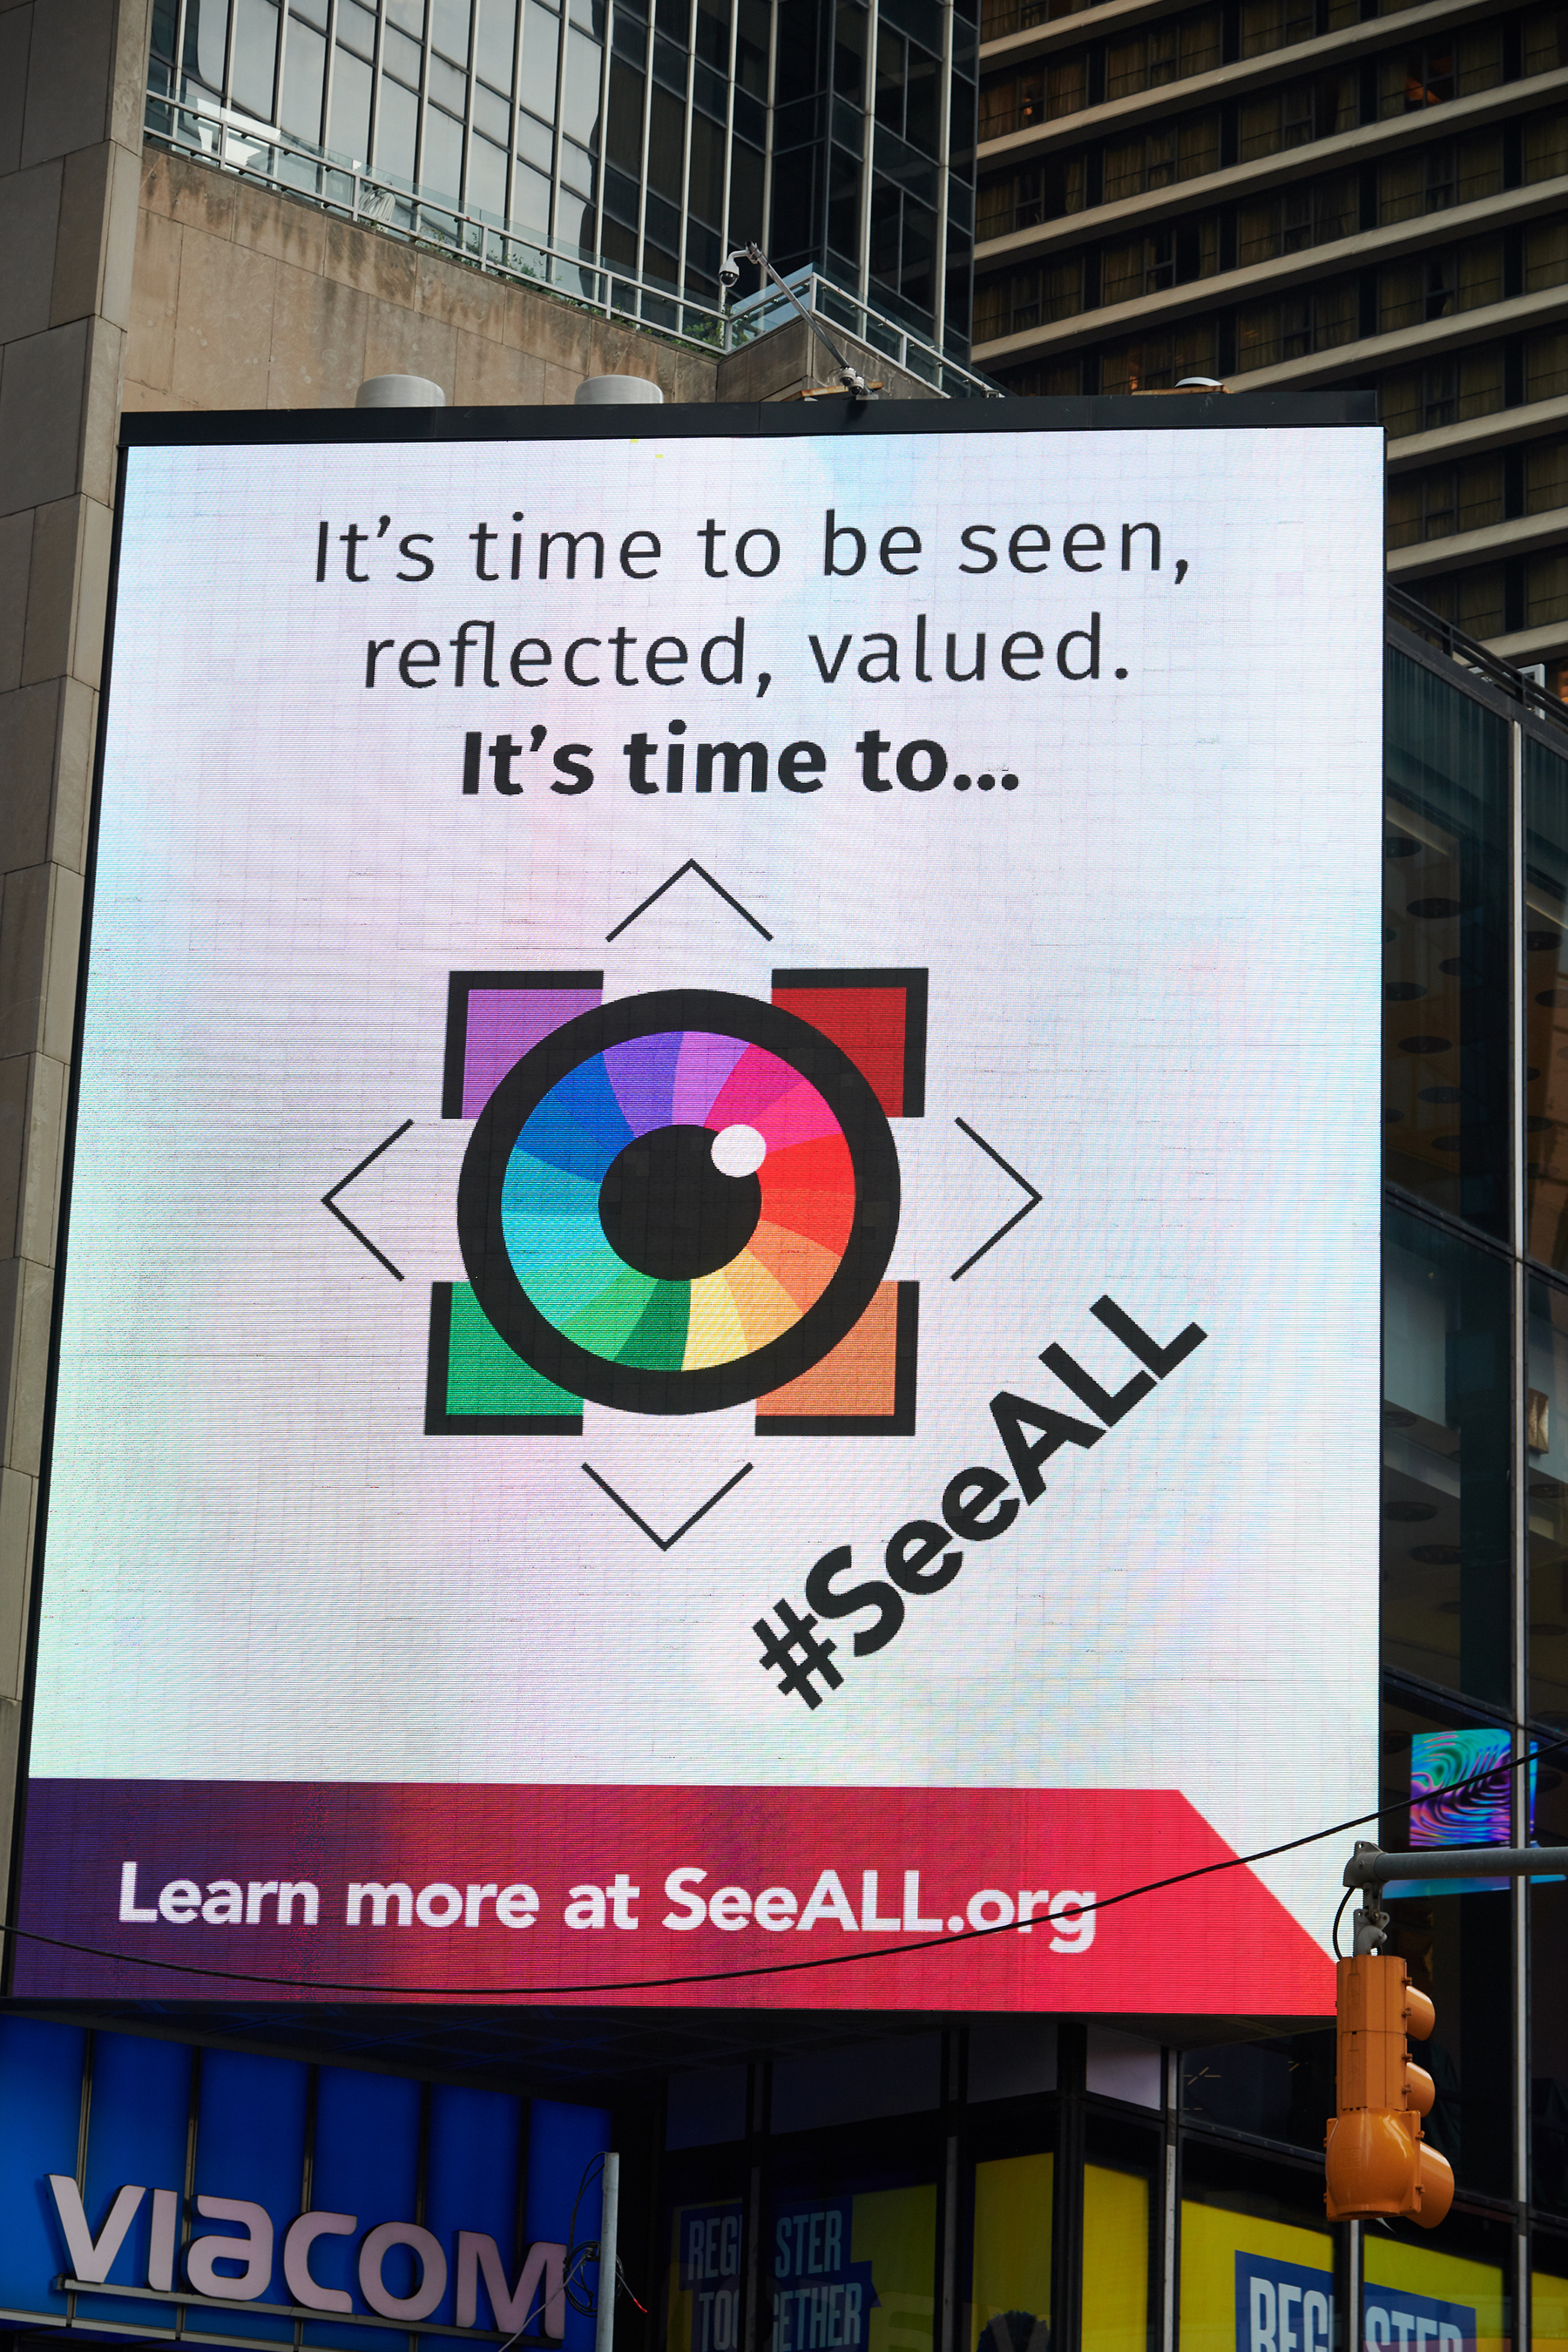 The Association of National Advertisers' (ANA) Alliance for Inclusive and MultiCultural Marketing (AIMM) launches #SeeALL campaign promoting greater diversity and cultural inclusion in brand advertising with a billboard takeover in NYC's Times Square on Monday, Sept. 23, 2019. Photo Credit: AP Images for Alliance for Inclusive and Multicultural Marketing (AIMM)